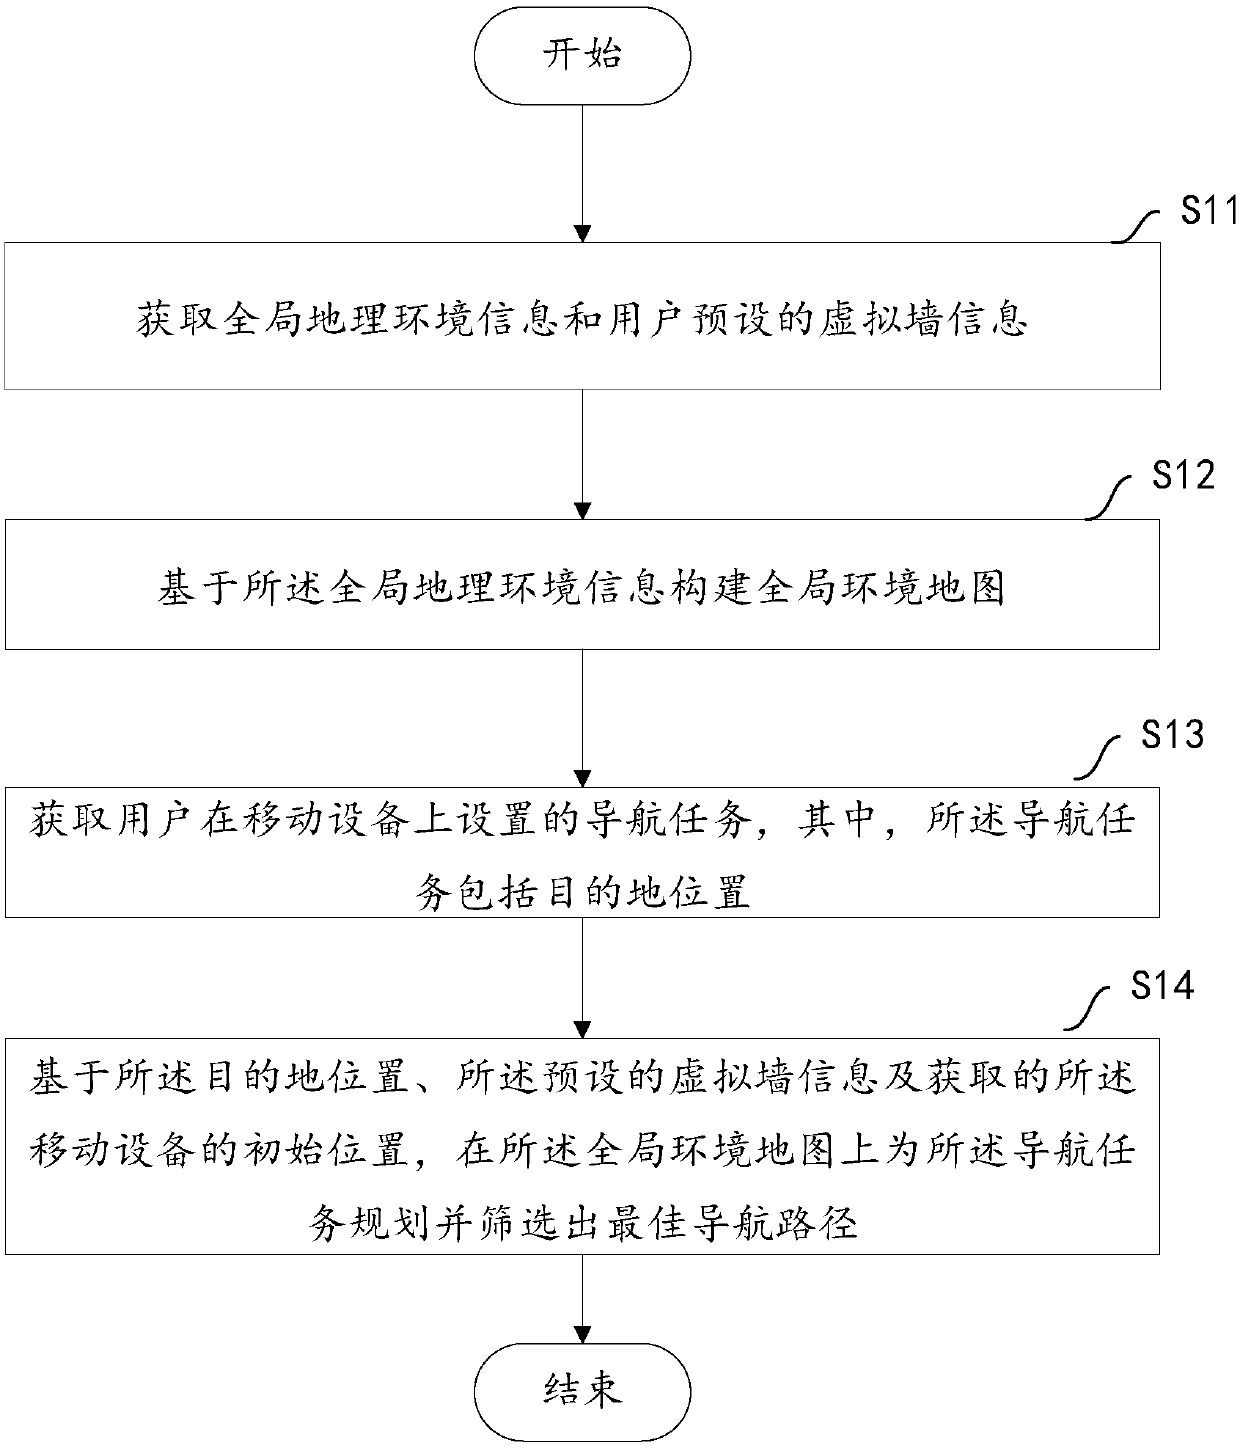 Navigation route planning method and equipment